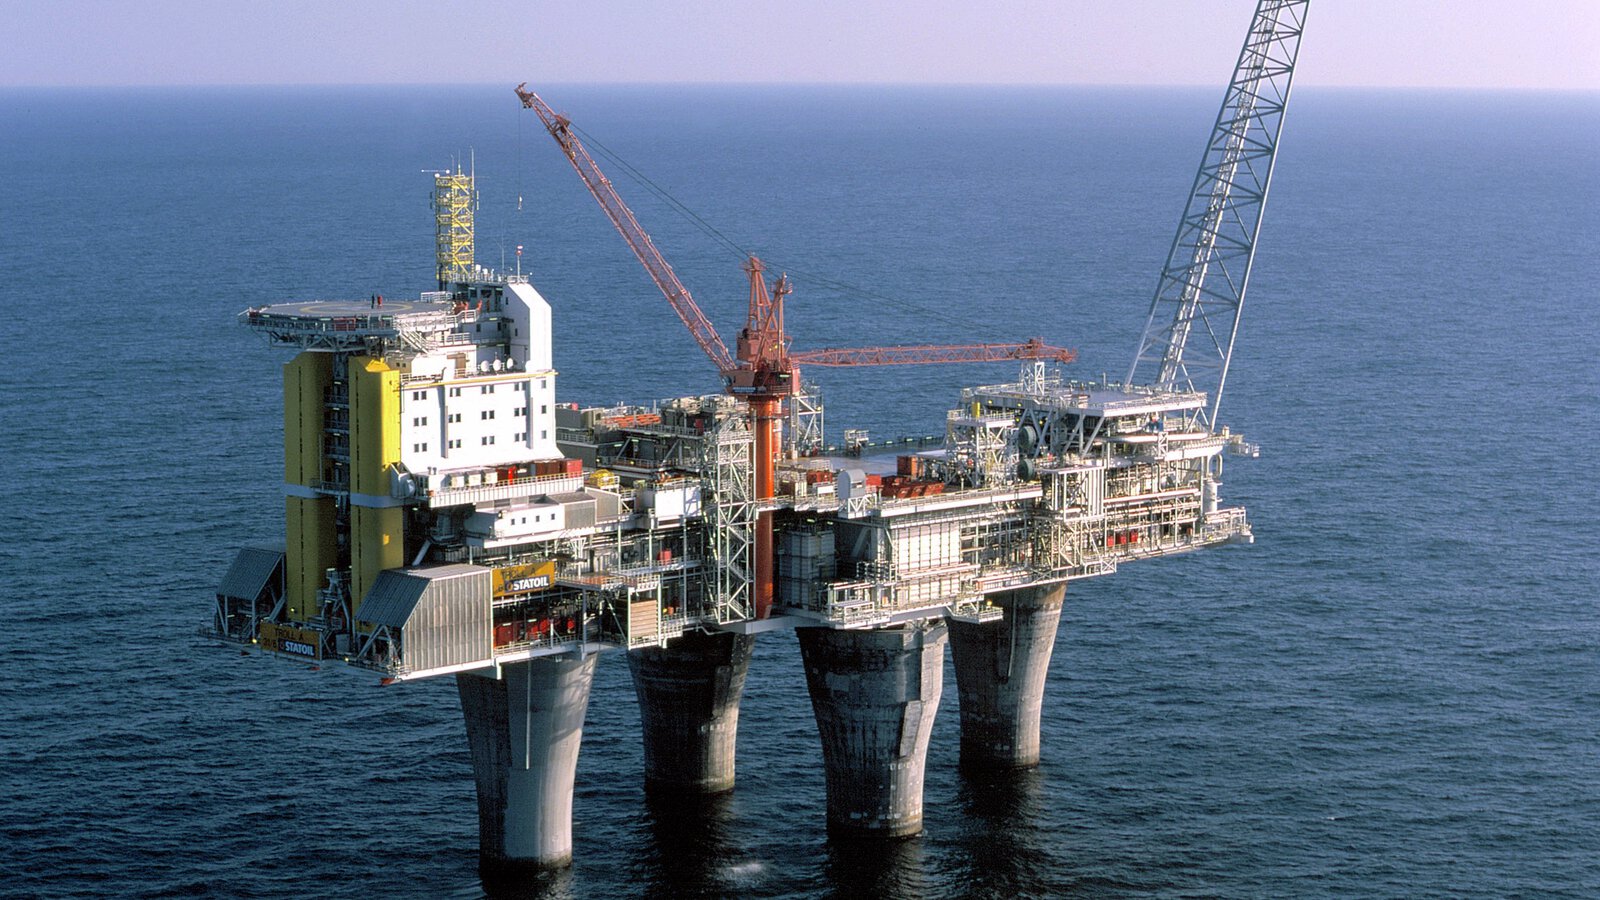 The oil platform Troll A offshore